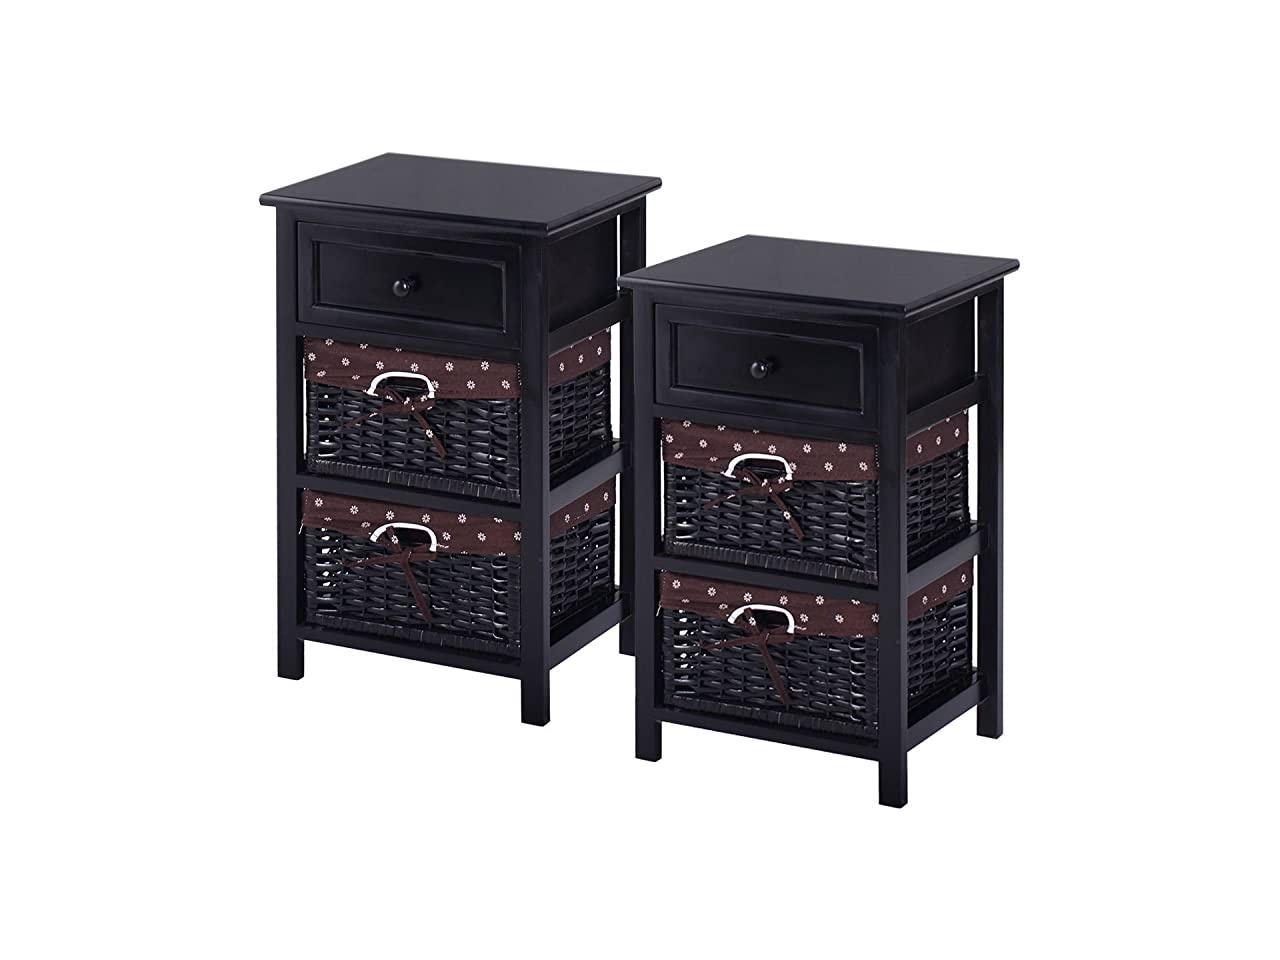 2/3/4 Tiers Modern Home Wooden Storage End Nightstand Weaving Baskets Drawers US 